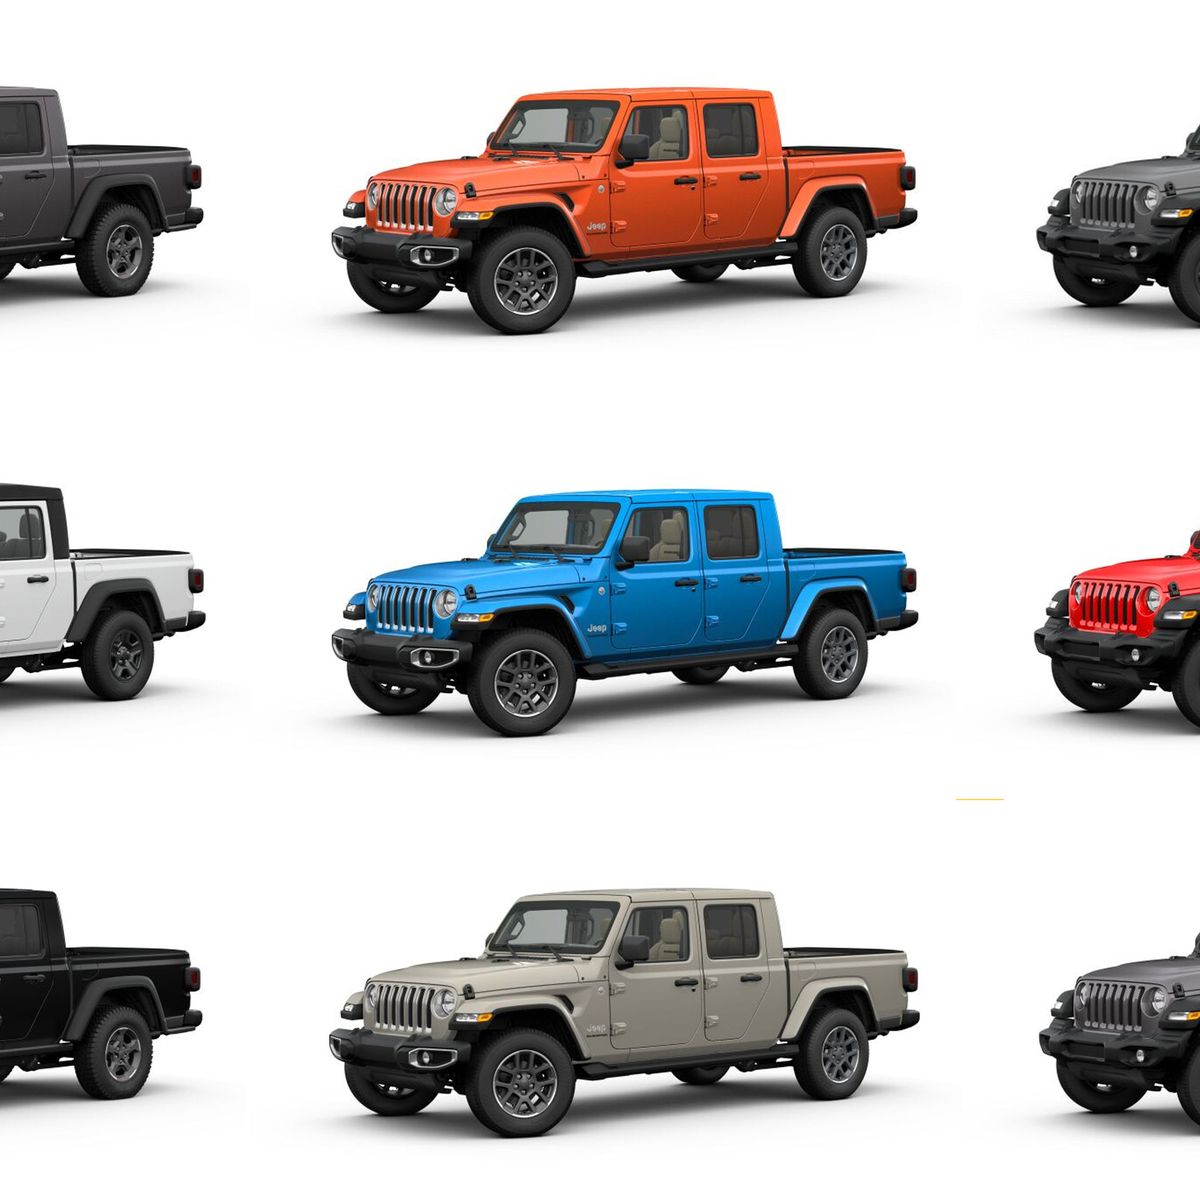 The Jeep Gladiator configurator is live: Build your dream off-road pickup  now